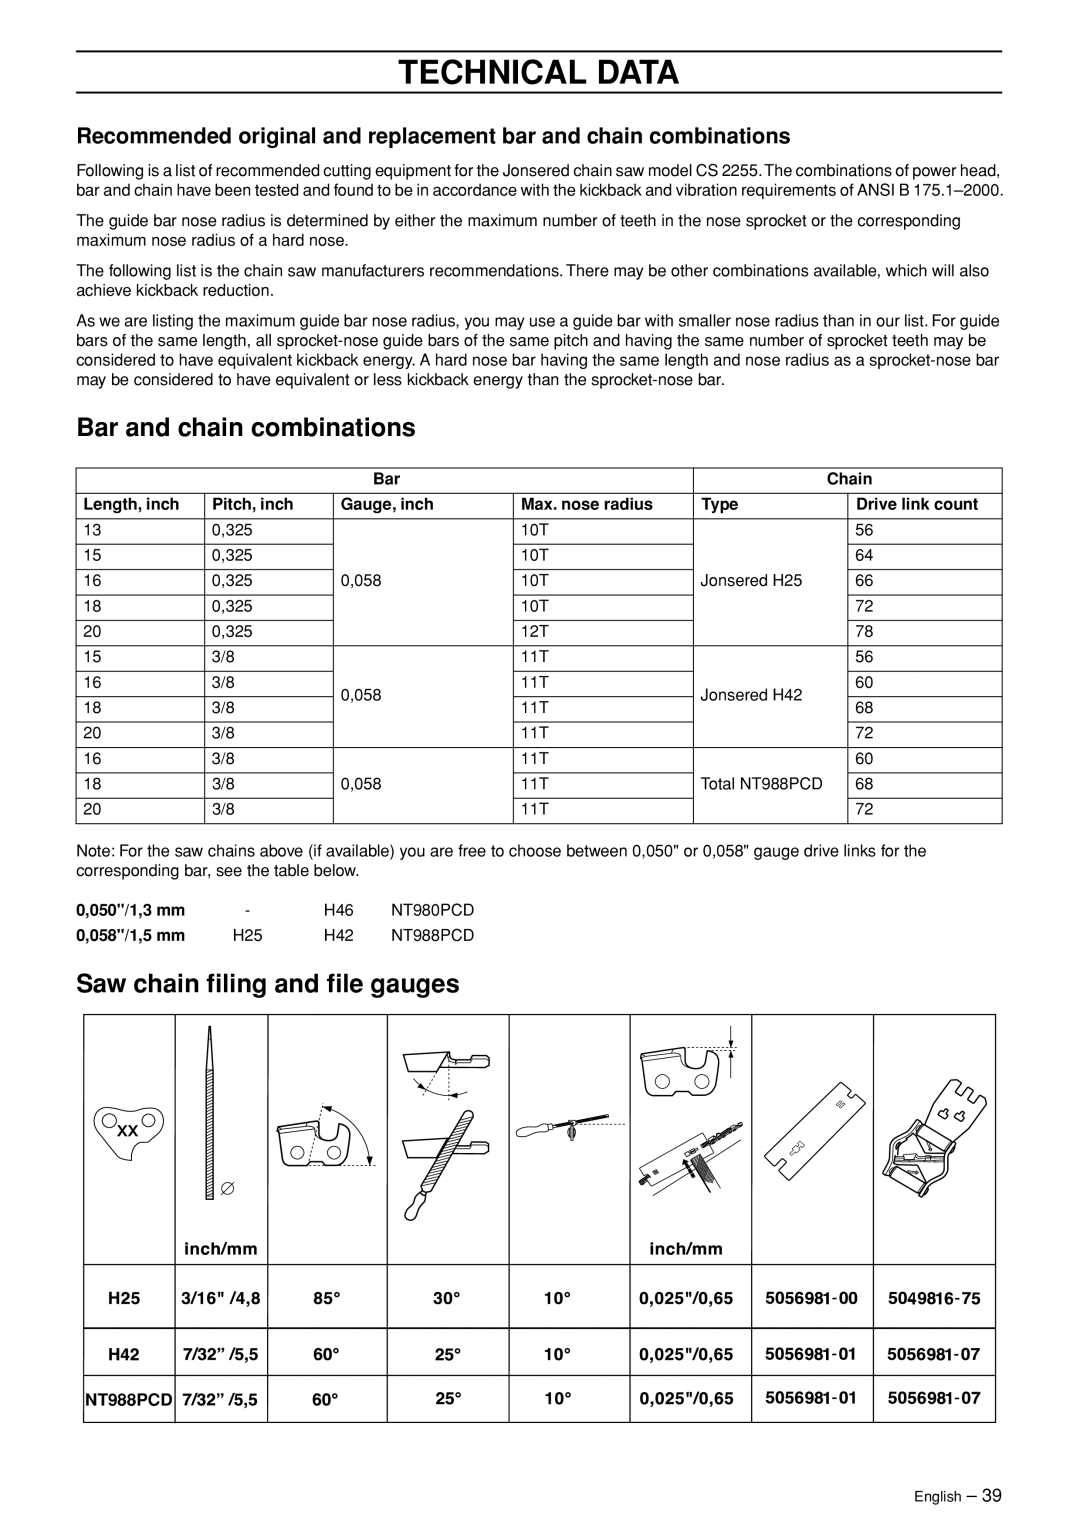 Jonsered CS 2255 manual Bar and chain combinations, Saw chain ﬁling and ﬁle gauges, Technical Data 